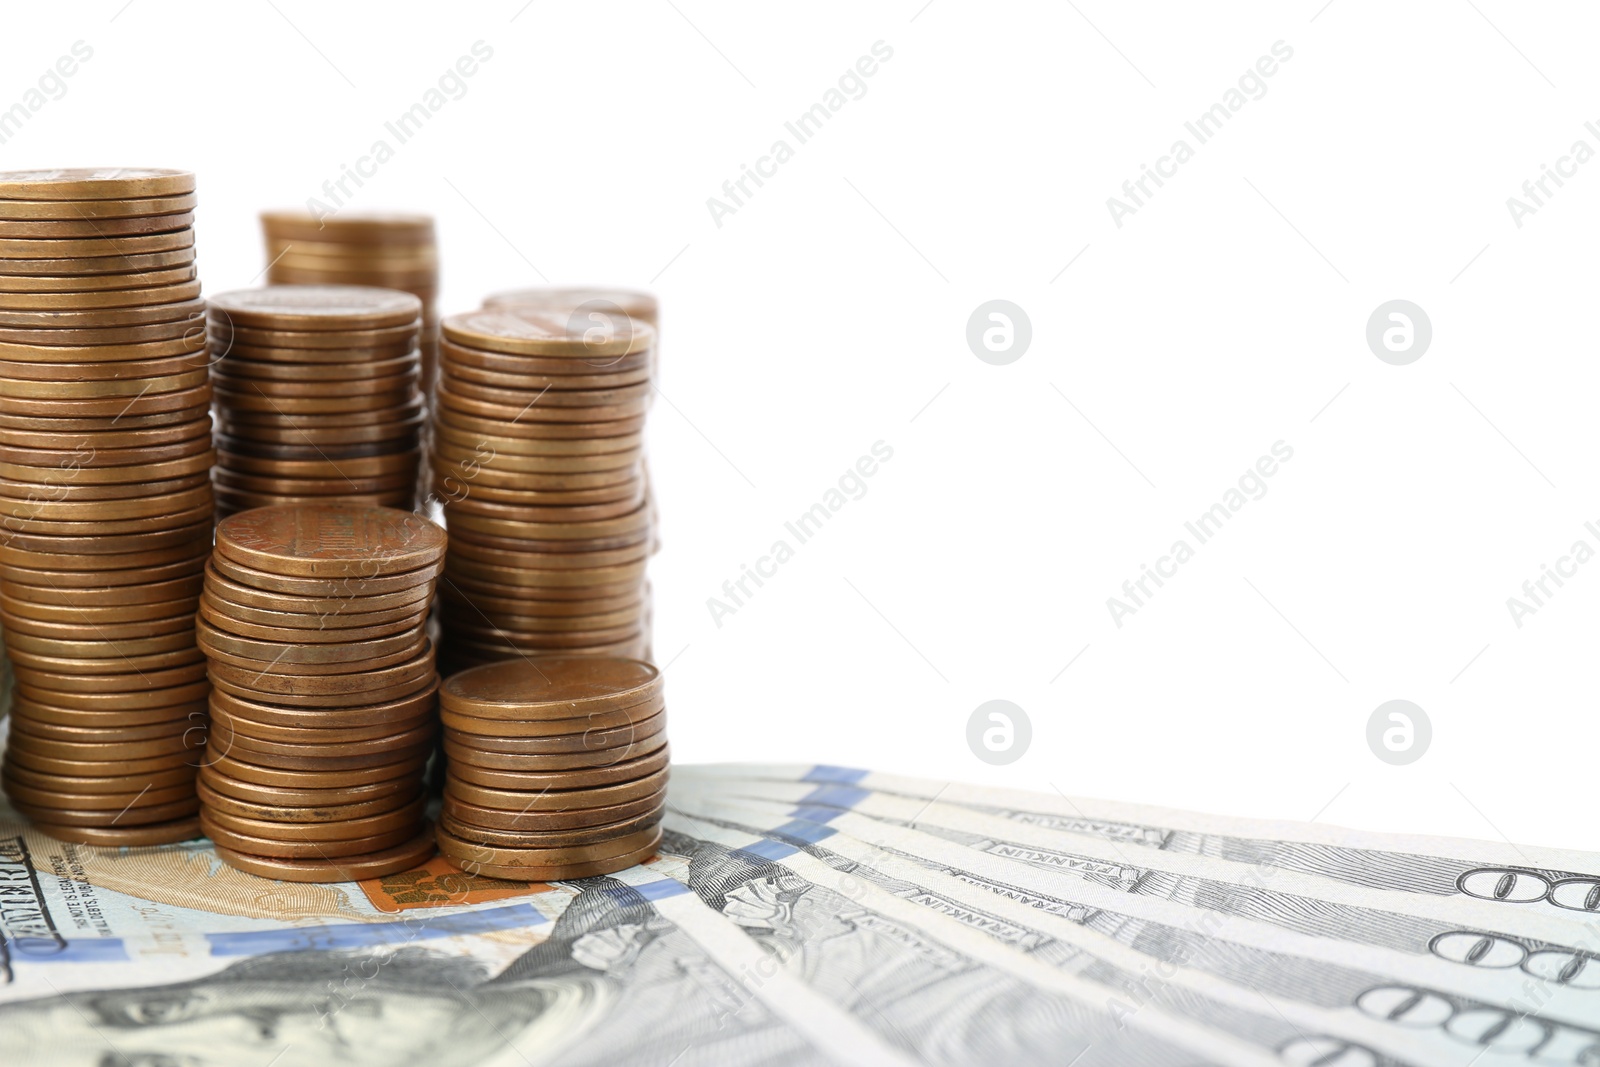 Photo of Dollar bills and coins on white background